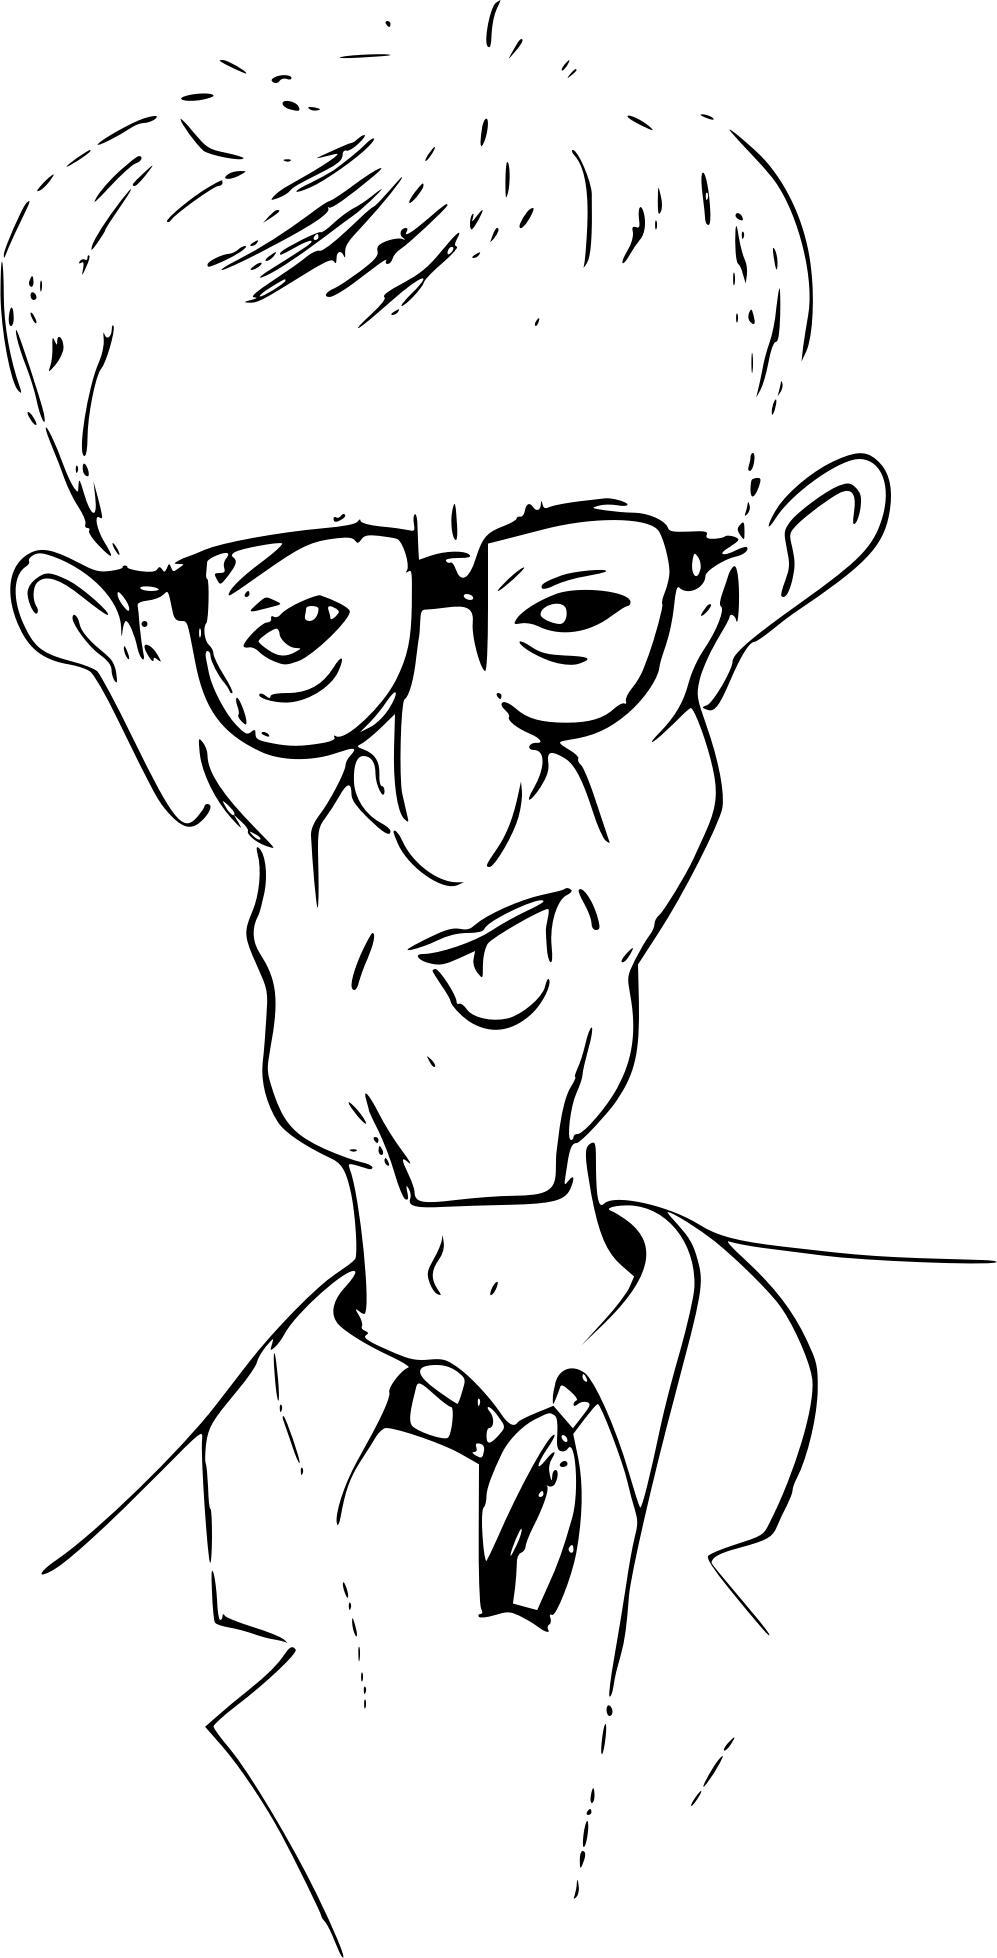 Woody Allen Caricature Outline png transparent